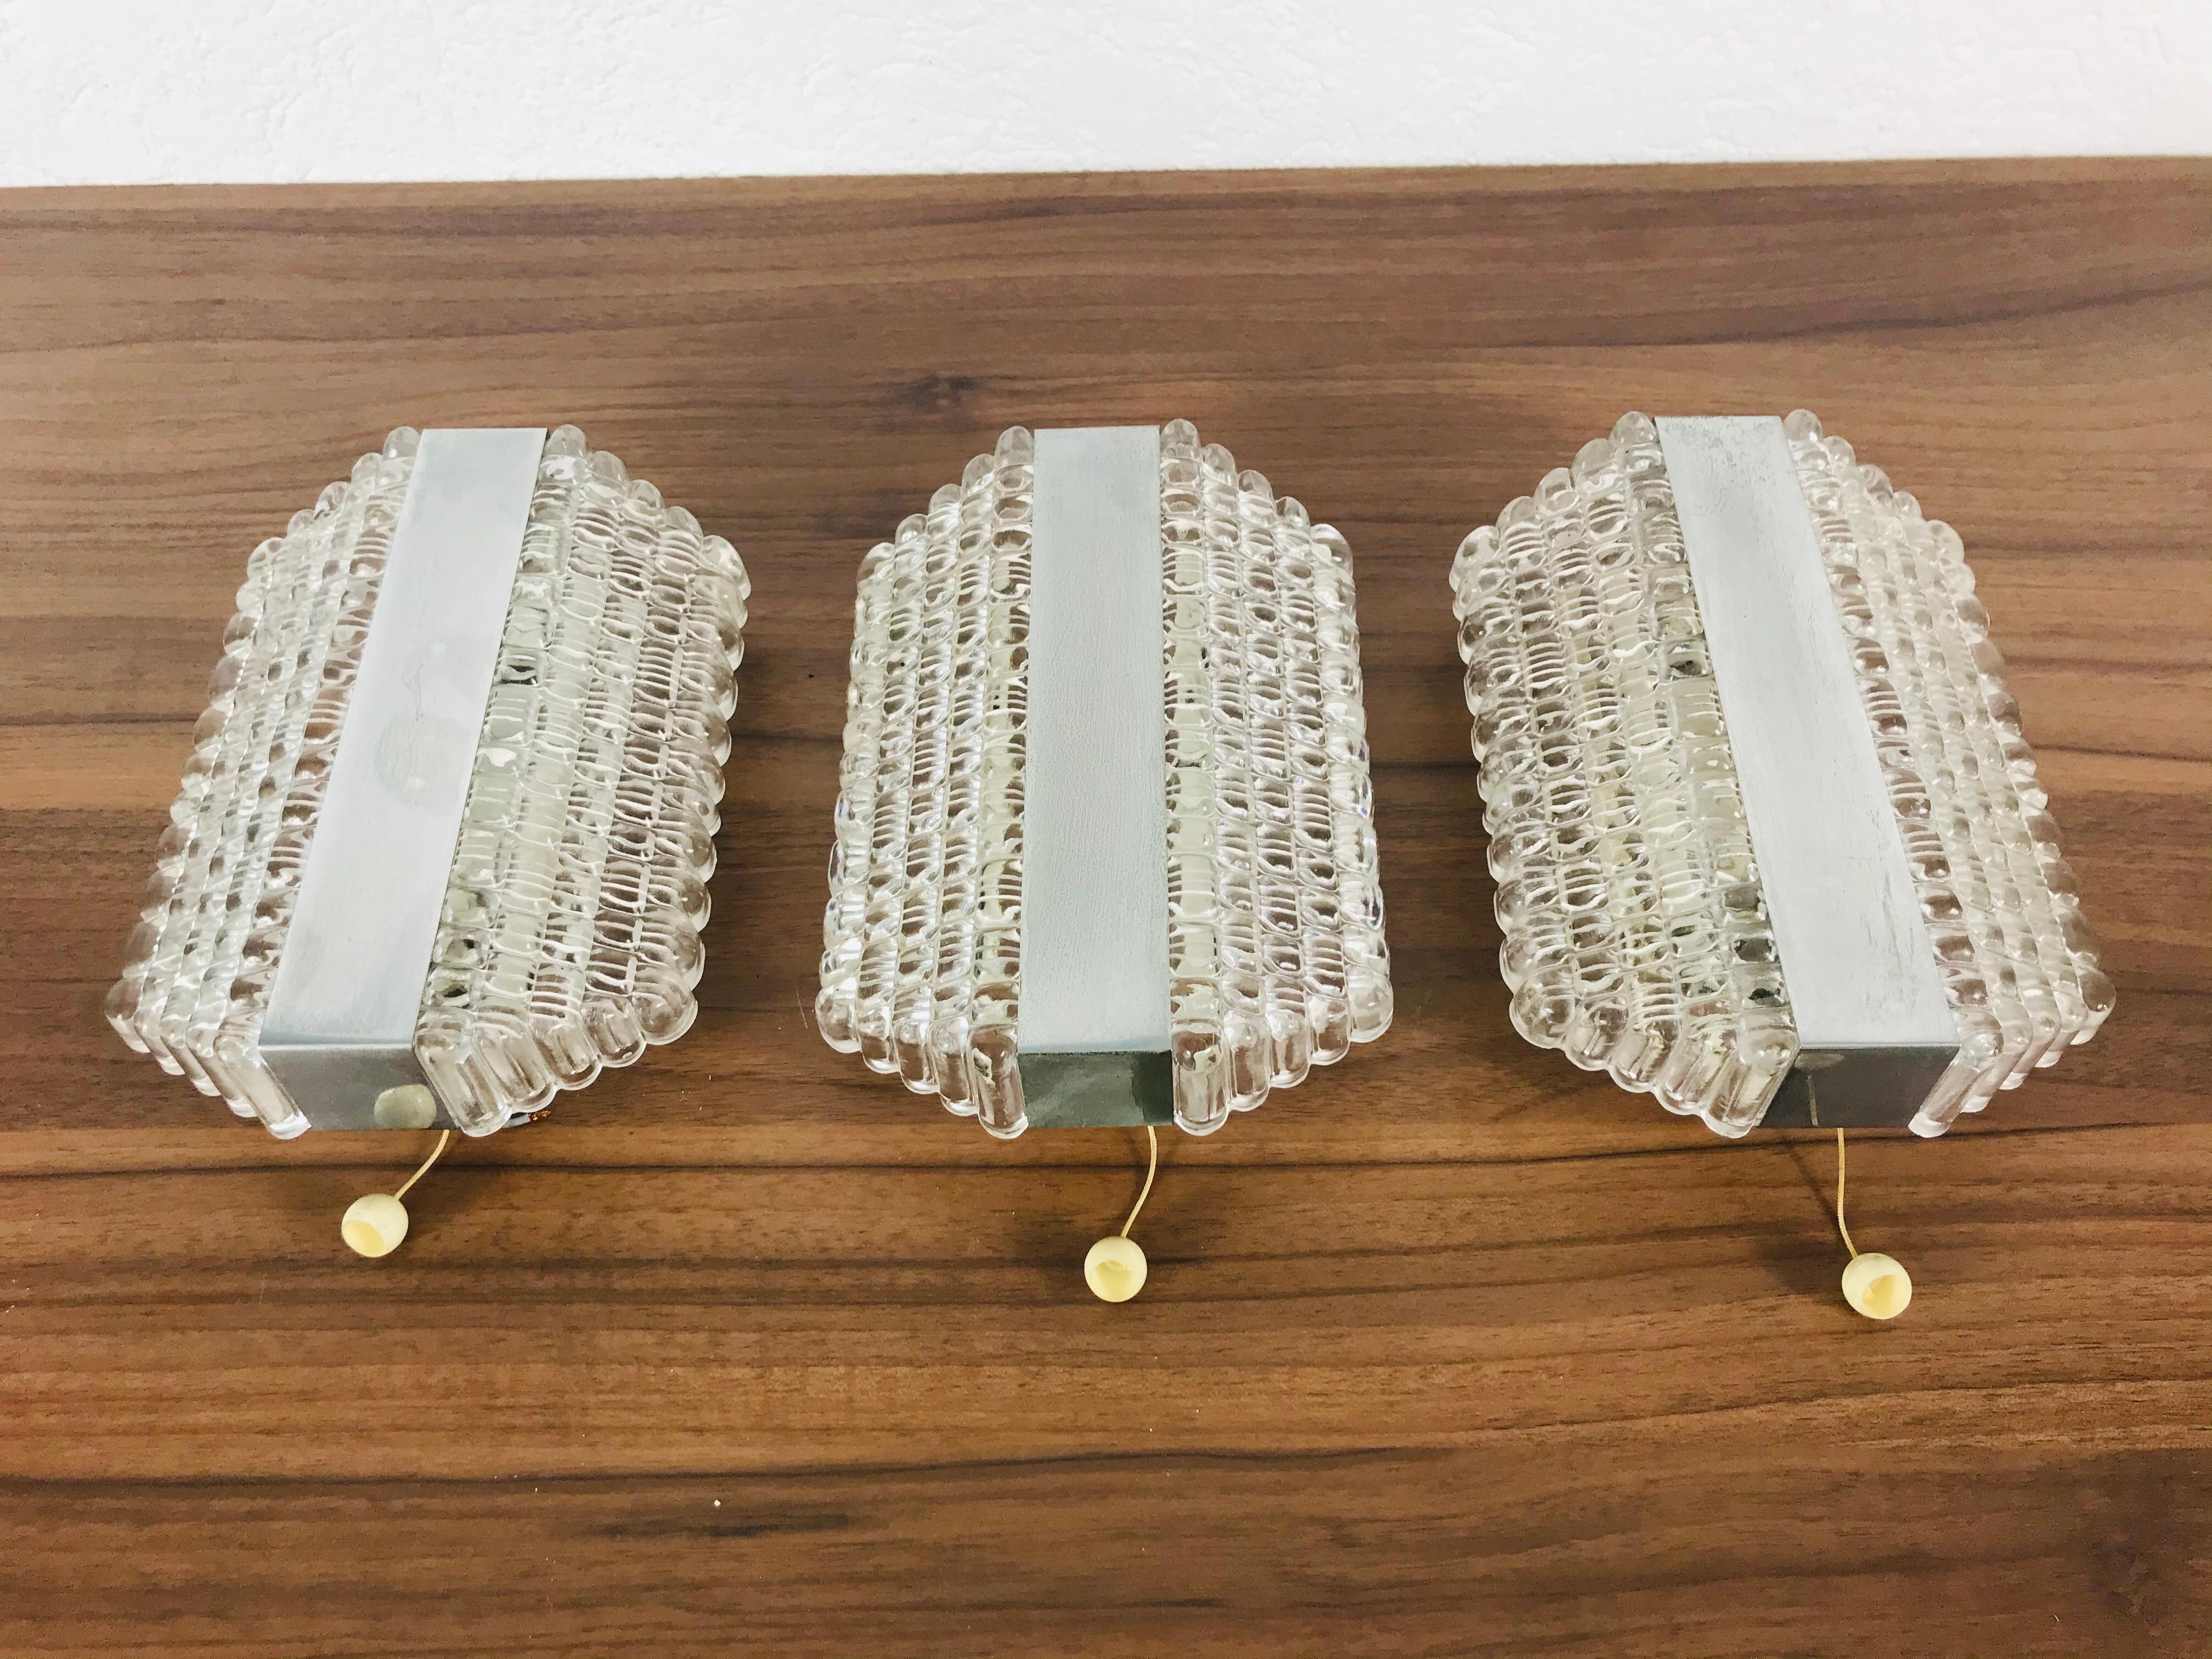 Set of 3 Metal and Glass Kaiser Midcentury Wall Lamps, 1960s, Germany For Sale 1